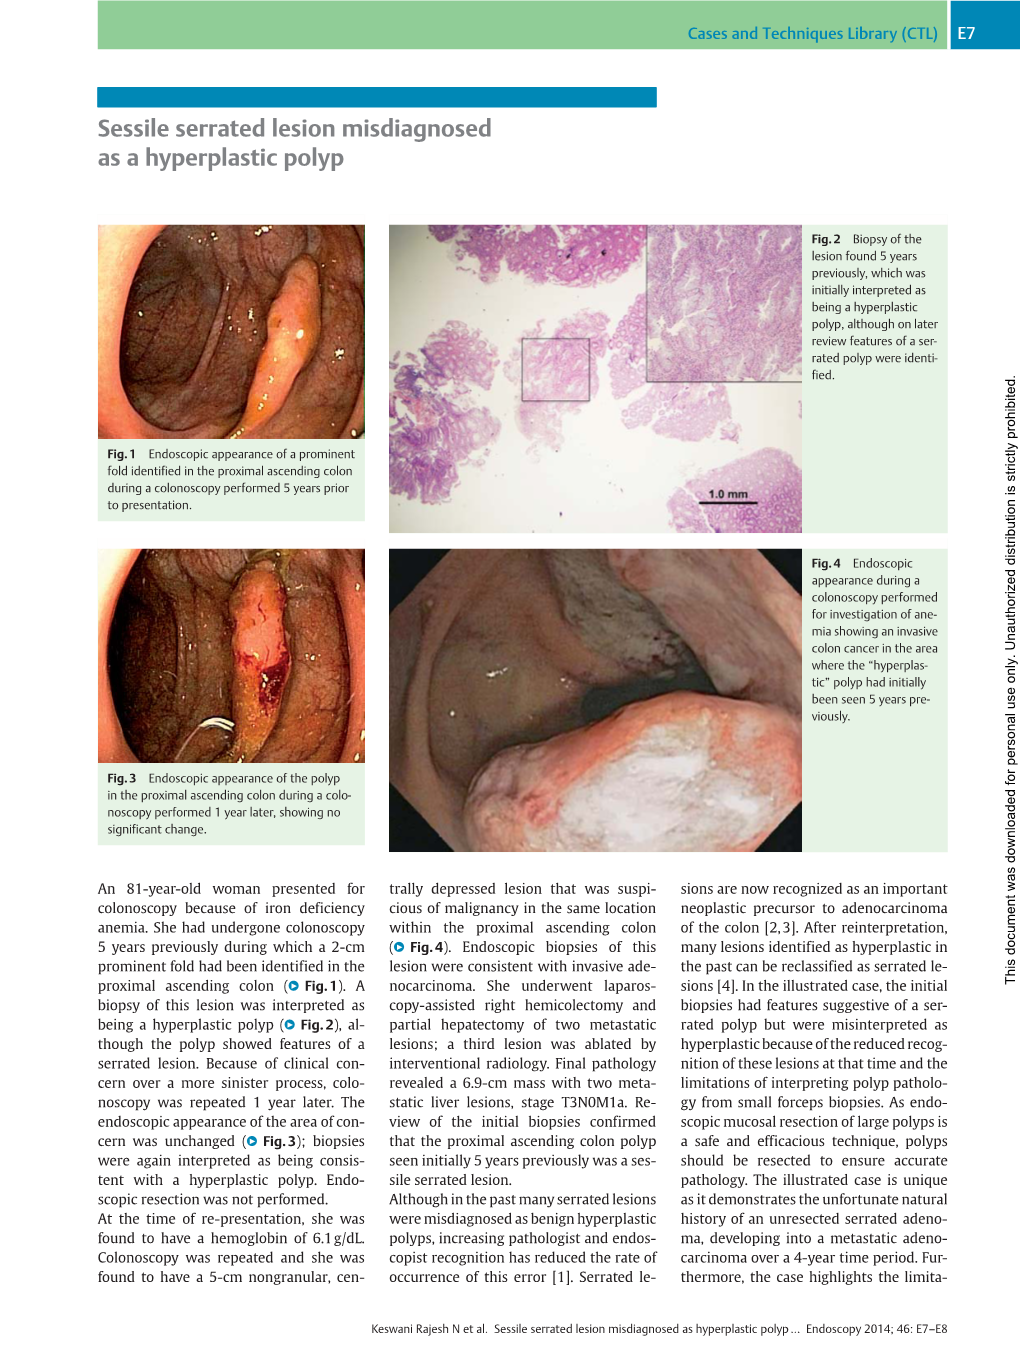 Sessile Serrated Lesion Misdiagnosed As a Hyperplastic Polyp